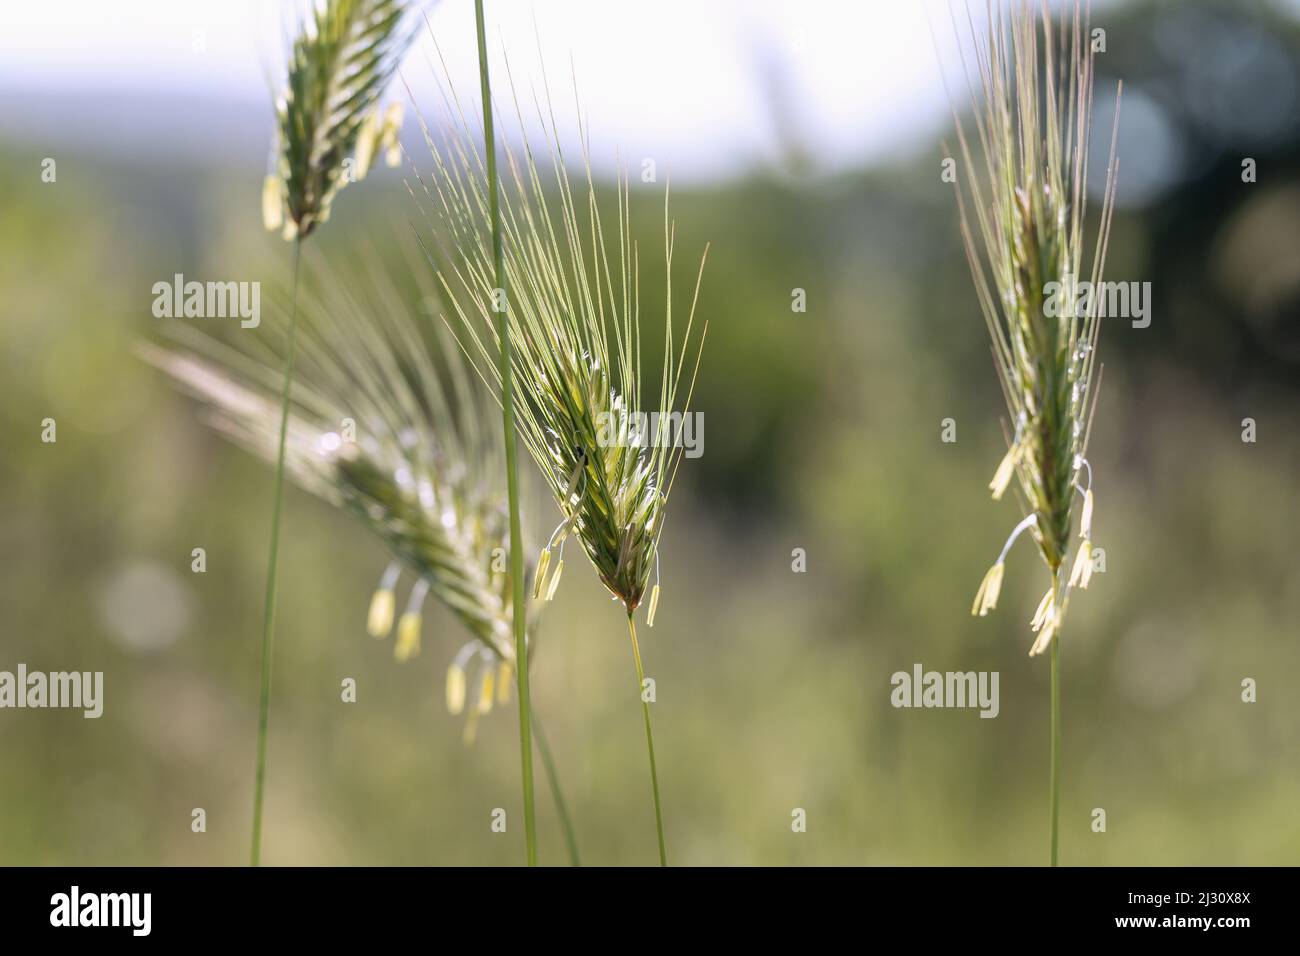 Rye, Secale cereale, inflorescence, rye pollen Stock Photo